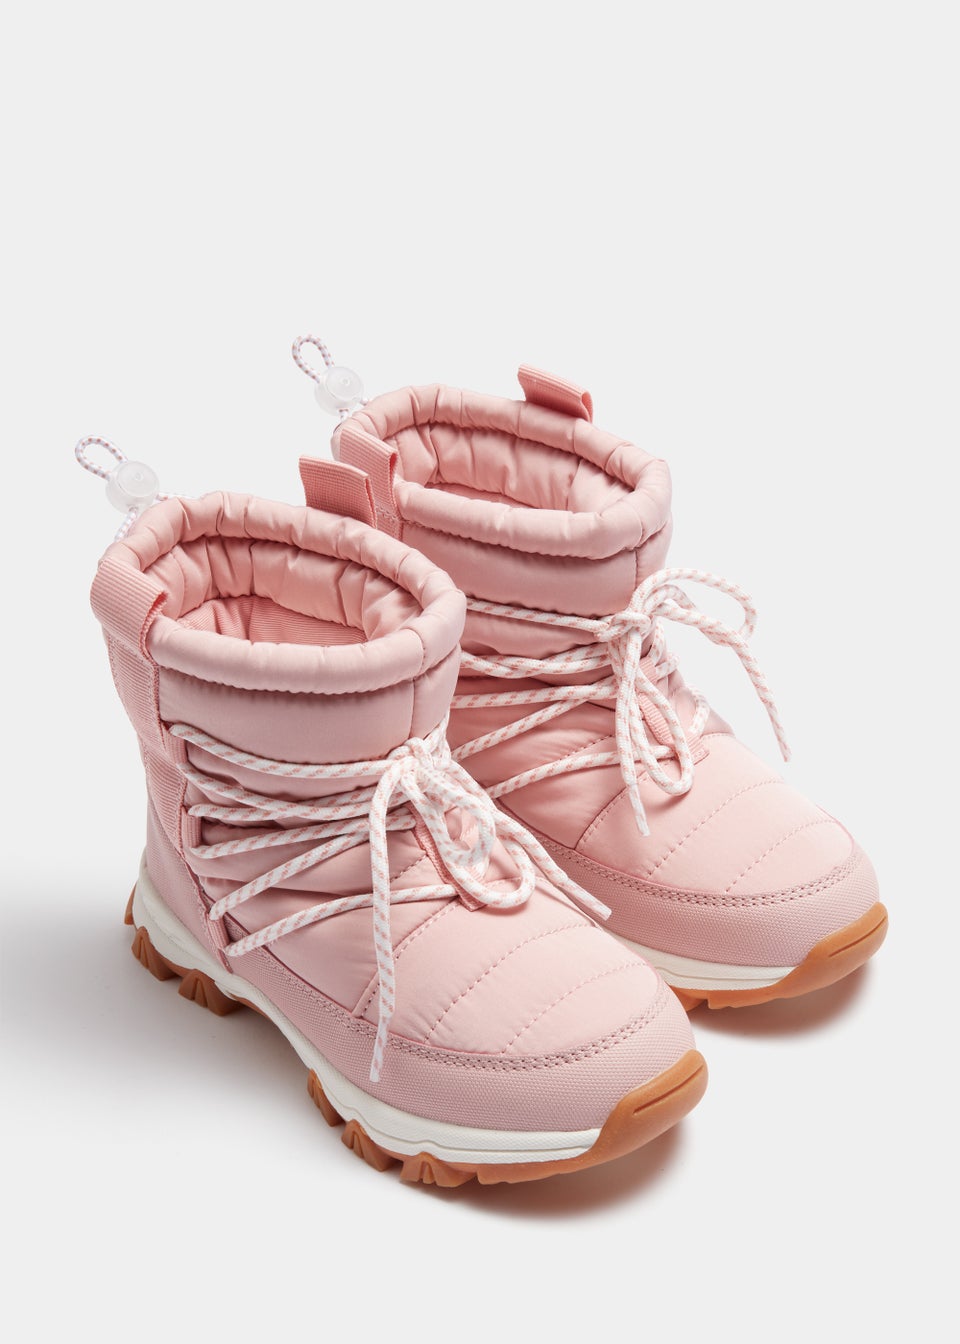 Girls Pink Snow Boots (Younger 8-Older 2)